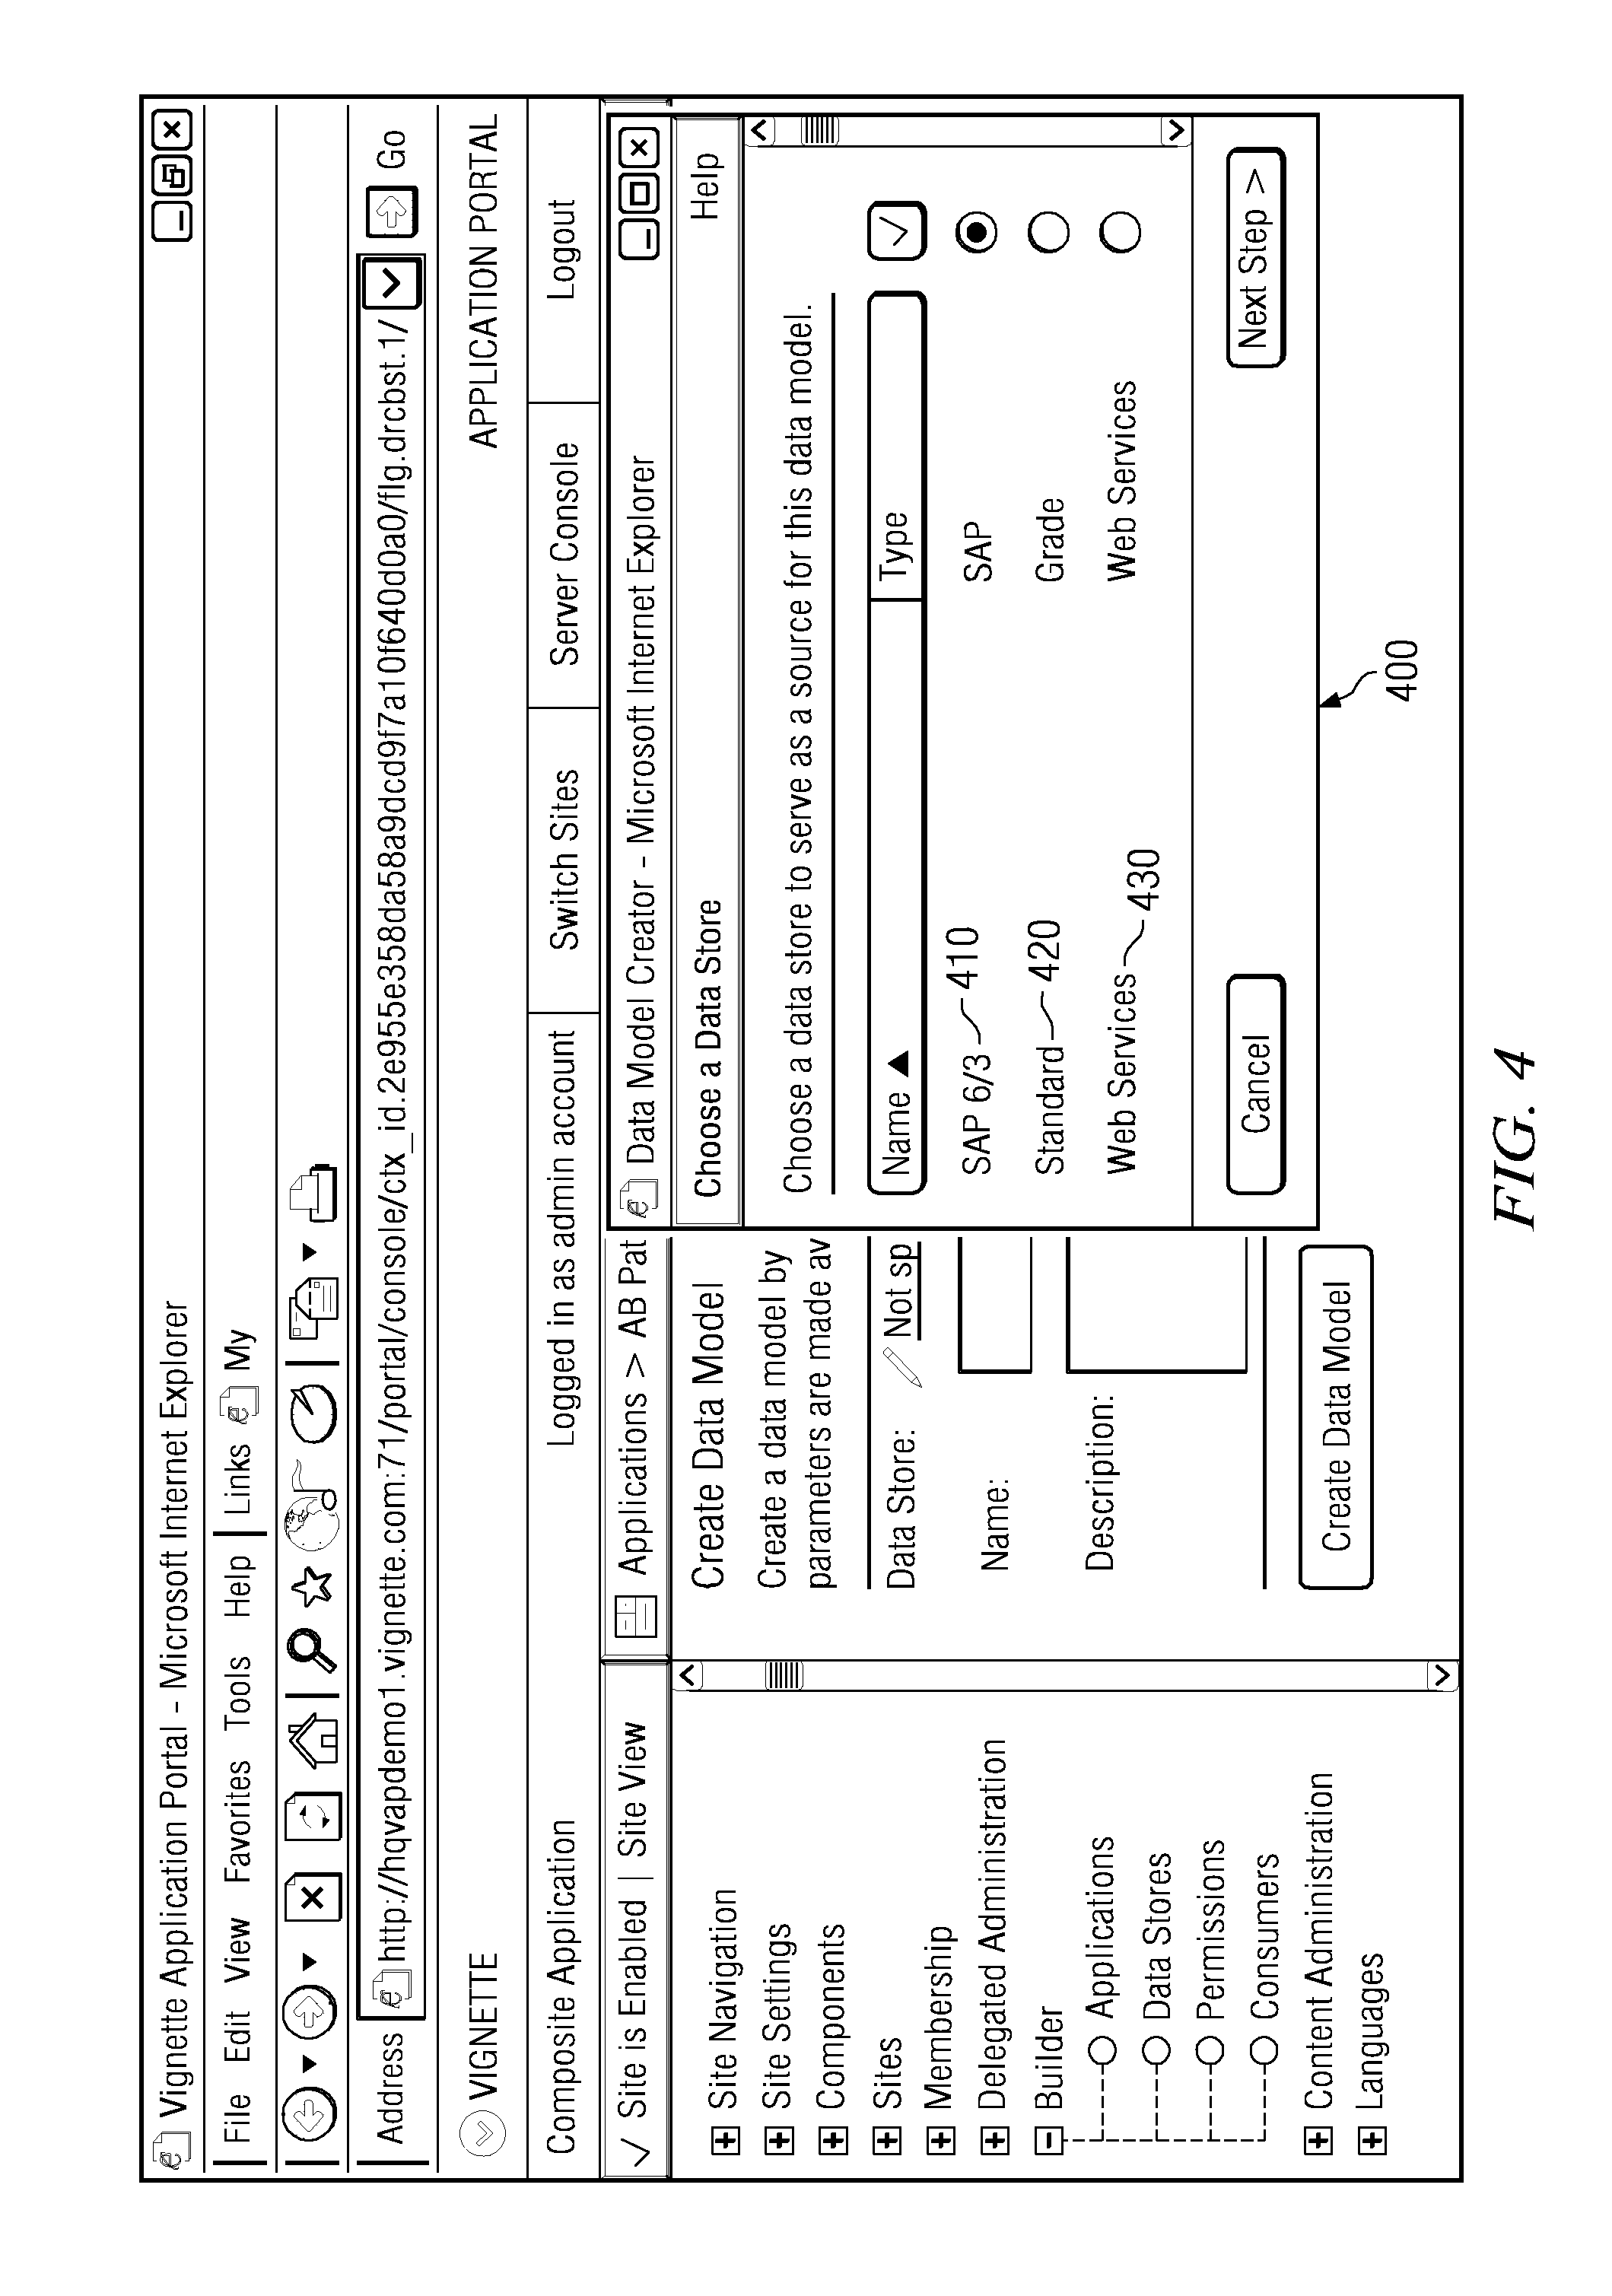 Method and system to provide composite view of components